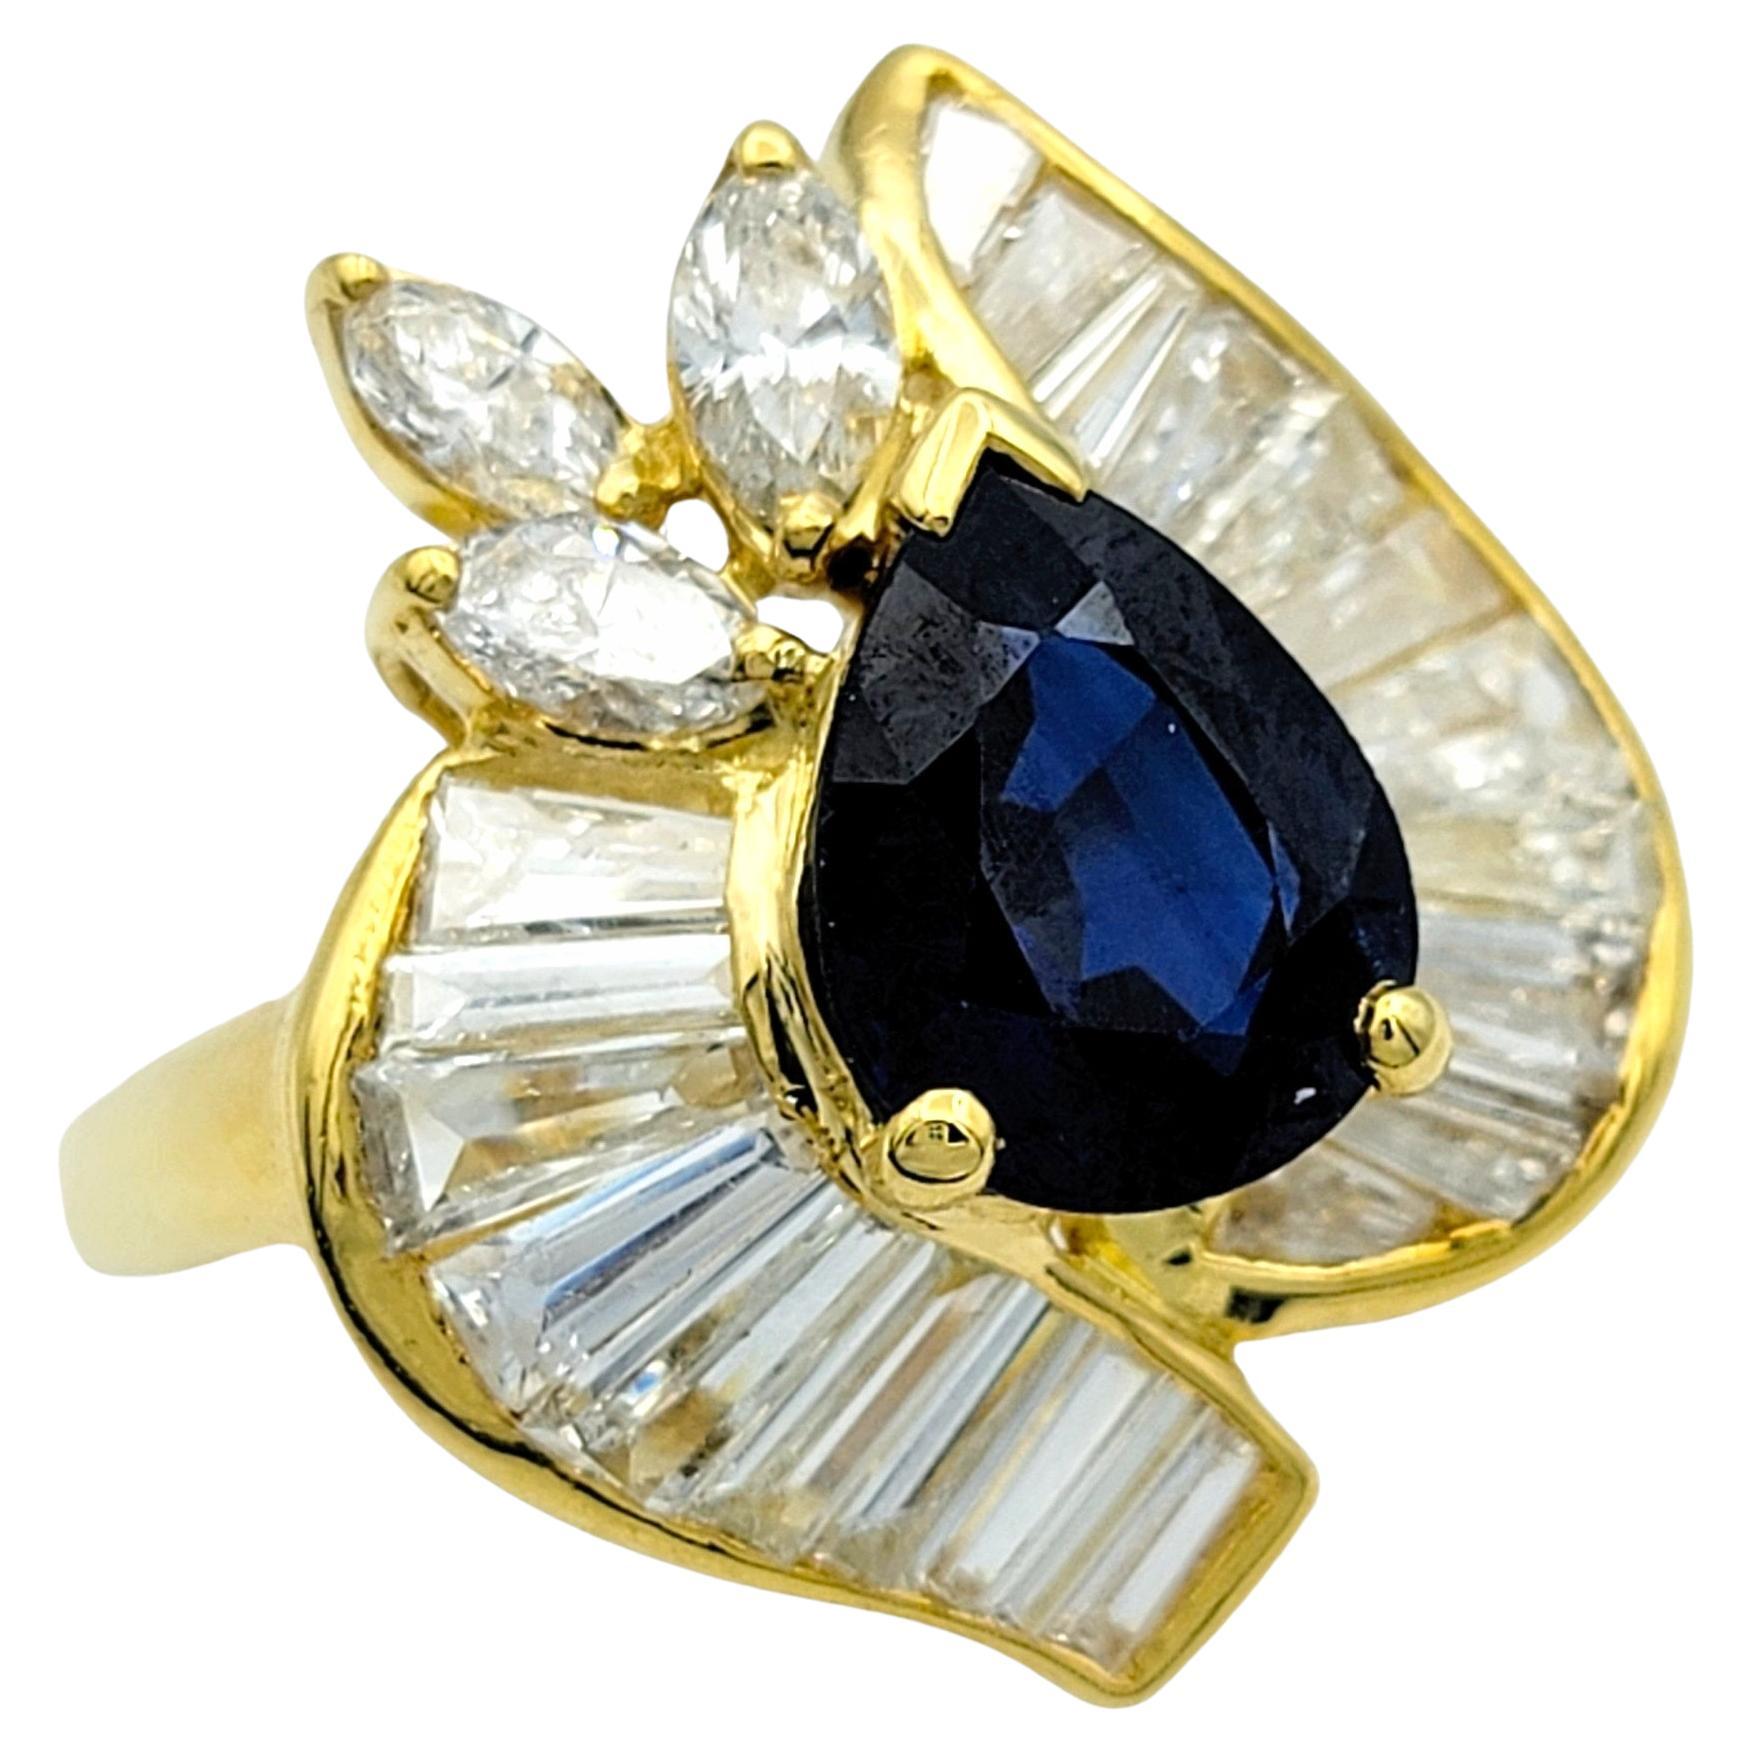 Ring Size: 7.25

This exquisite ring features a captivating pear-shaped blue sapphire as its focal point, exuding a deep and mesmerizing hue. Encircling the sapphire is a halo of shimmering diamonds, meticulously arranged in an asymmetrical pattern